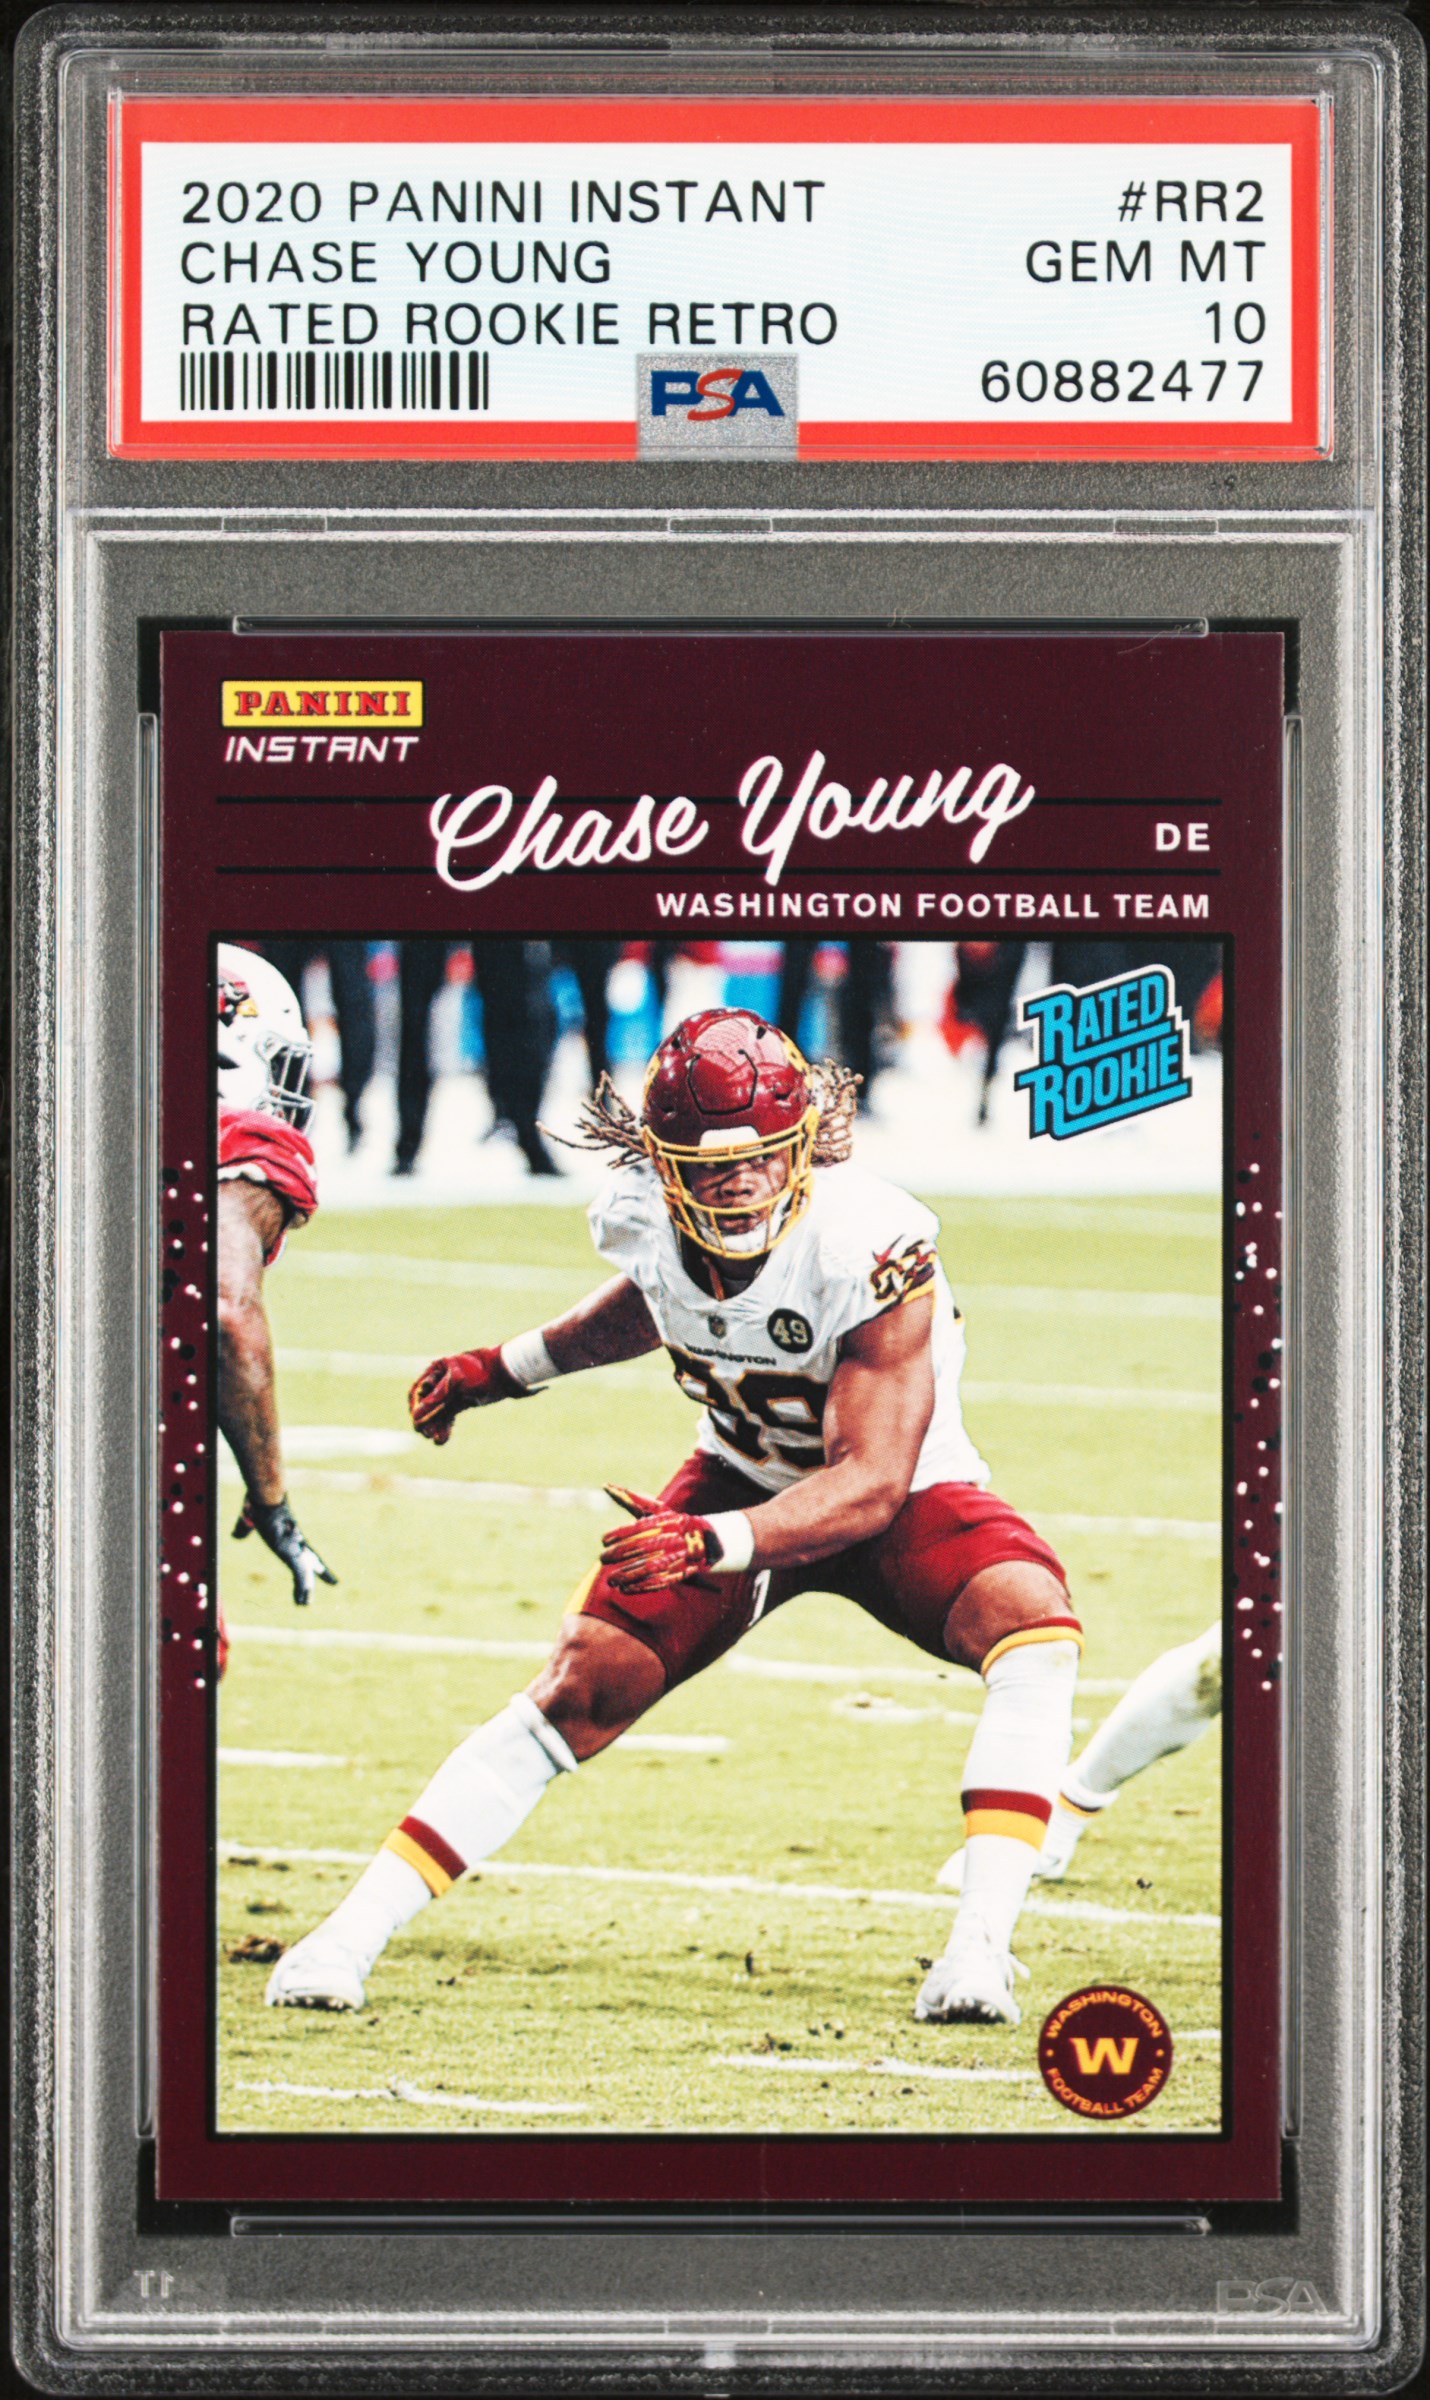 2020 Panini Instant Rated Rookie Retro #RR2 Chase Young Rookie Card - PSA GEM MT 10